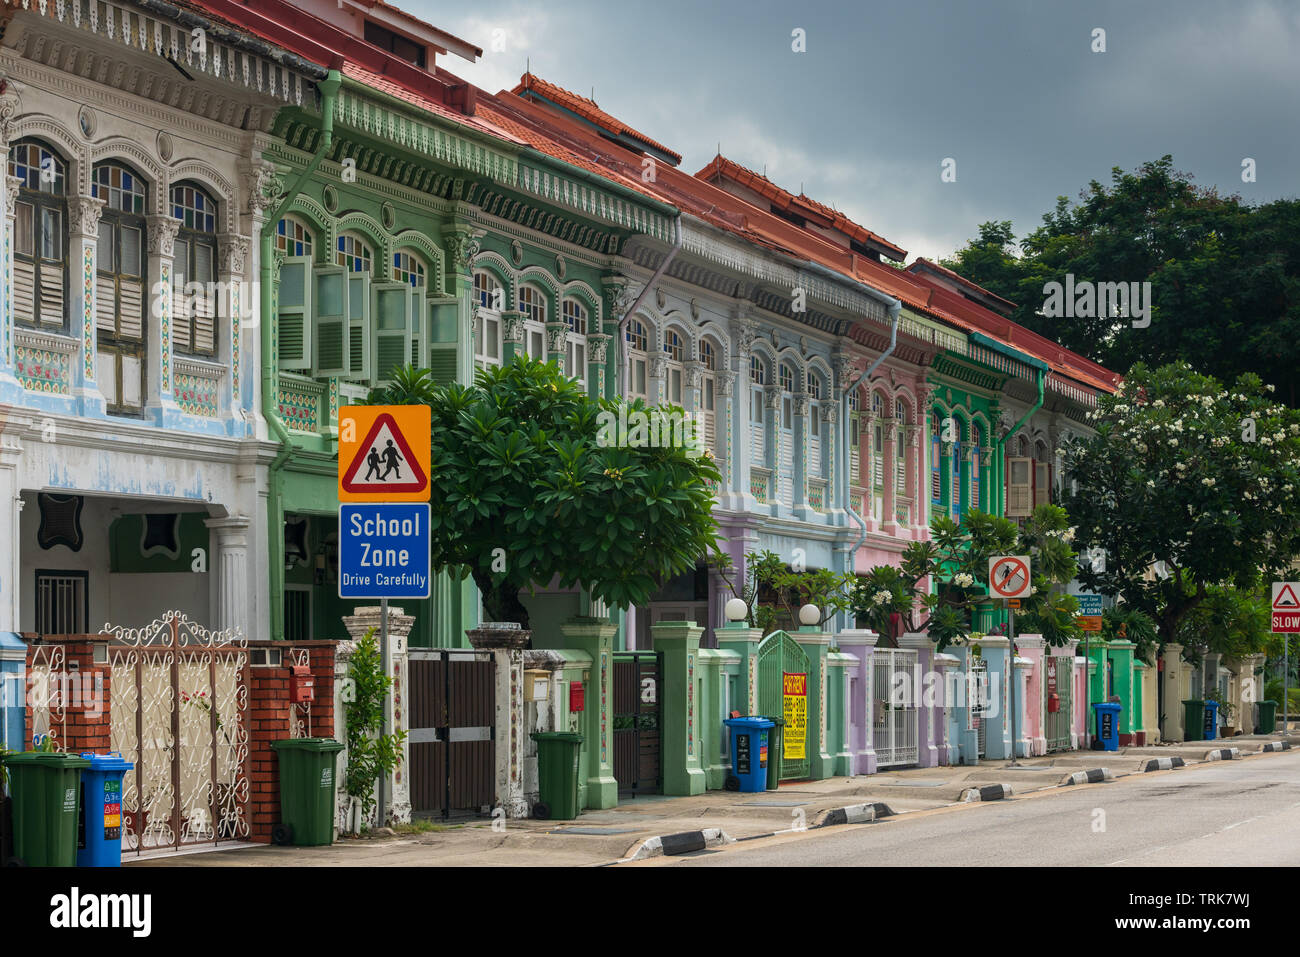 The Joo Chiat area of Singapore is well known for Peranakan style architecture and colourful shophouses. Stock Photo